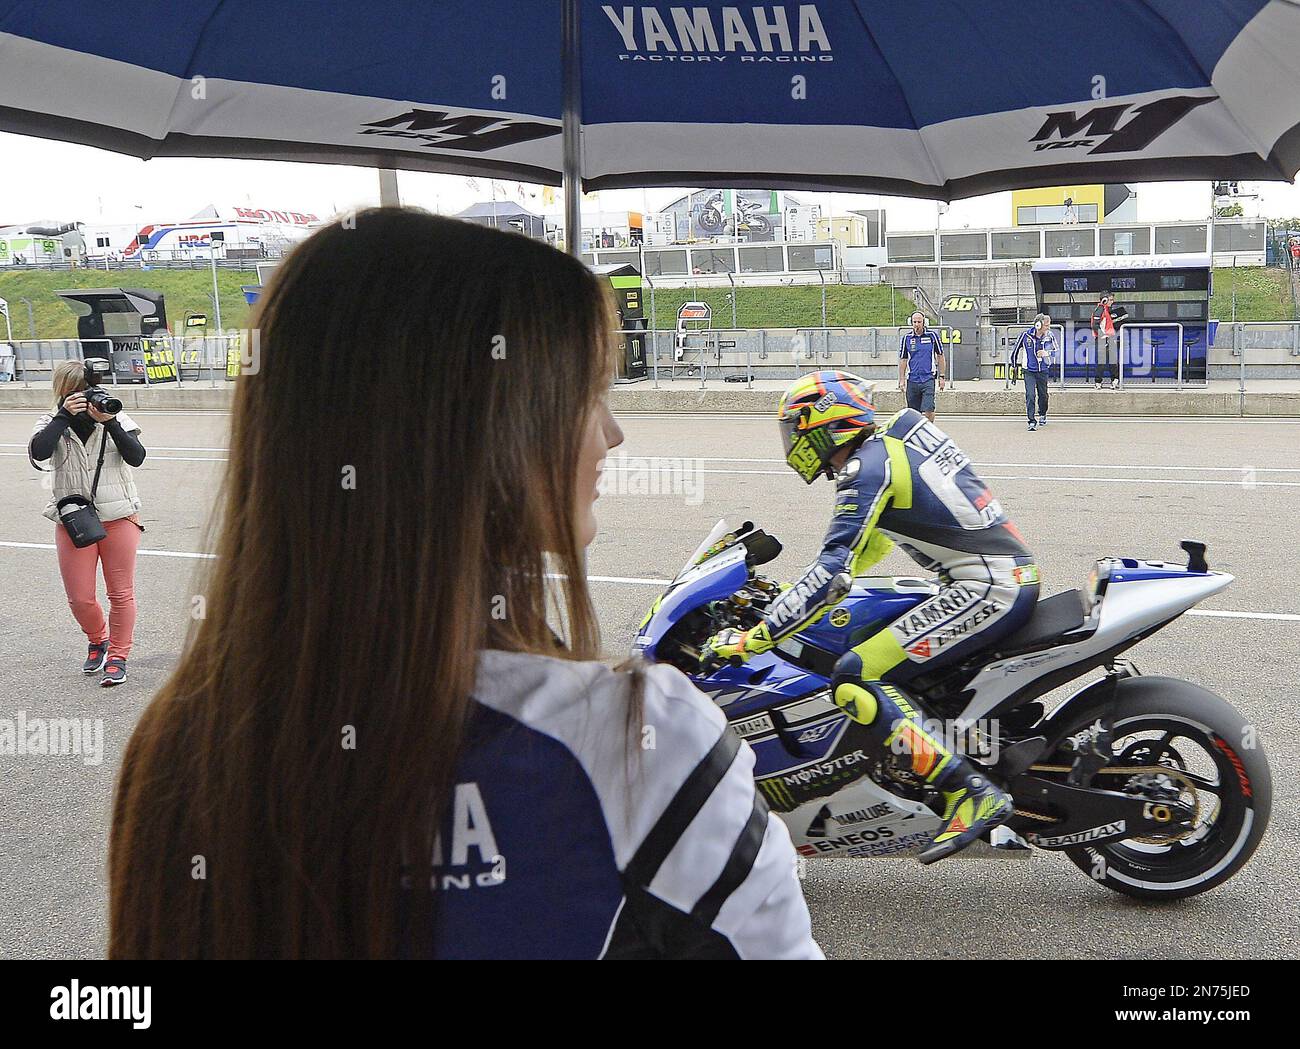 Yamaha rider Valentino Rossi of Italy arrives in the paddock during the MotoGP free practice at the Sachsenring circuit in Hohenstein-Ernstthal, near the city of Chemnitz, Germany, Saturday, July 13, 2013